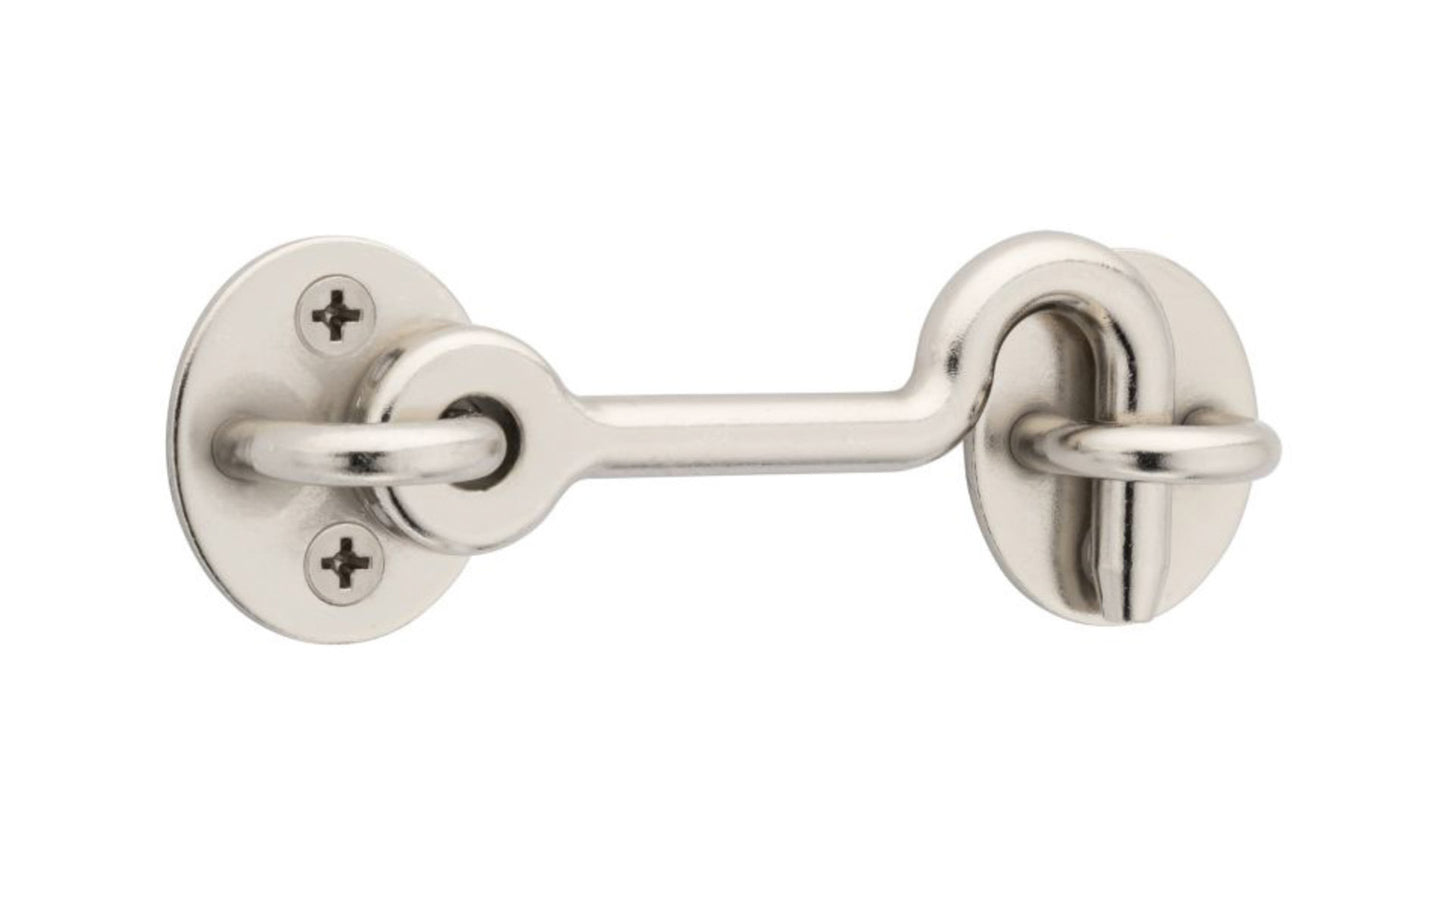 4" Satin Nickel Privacy Hook. Designed for interior barn door hardware. privacy hook. Adds a privacy function to any sliding door hardware door. Includes fasteners. Sold as a single hook and pad. Includes four flat head phillips screws. National Hardware model N187-036. 886780018981